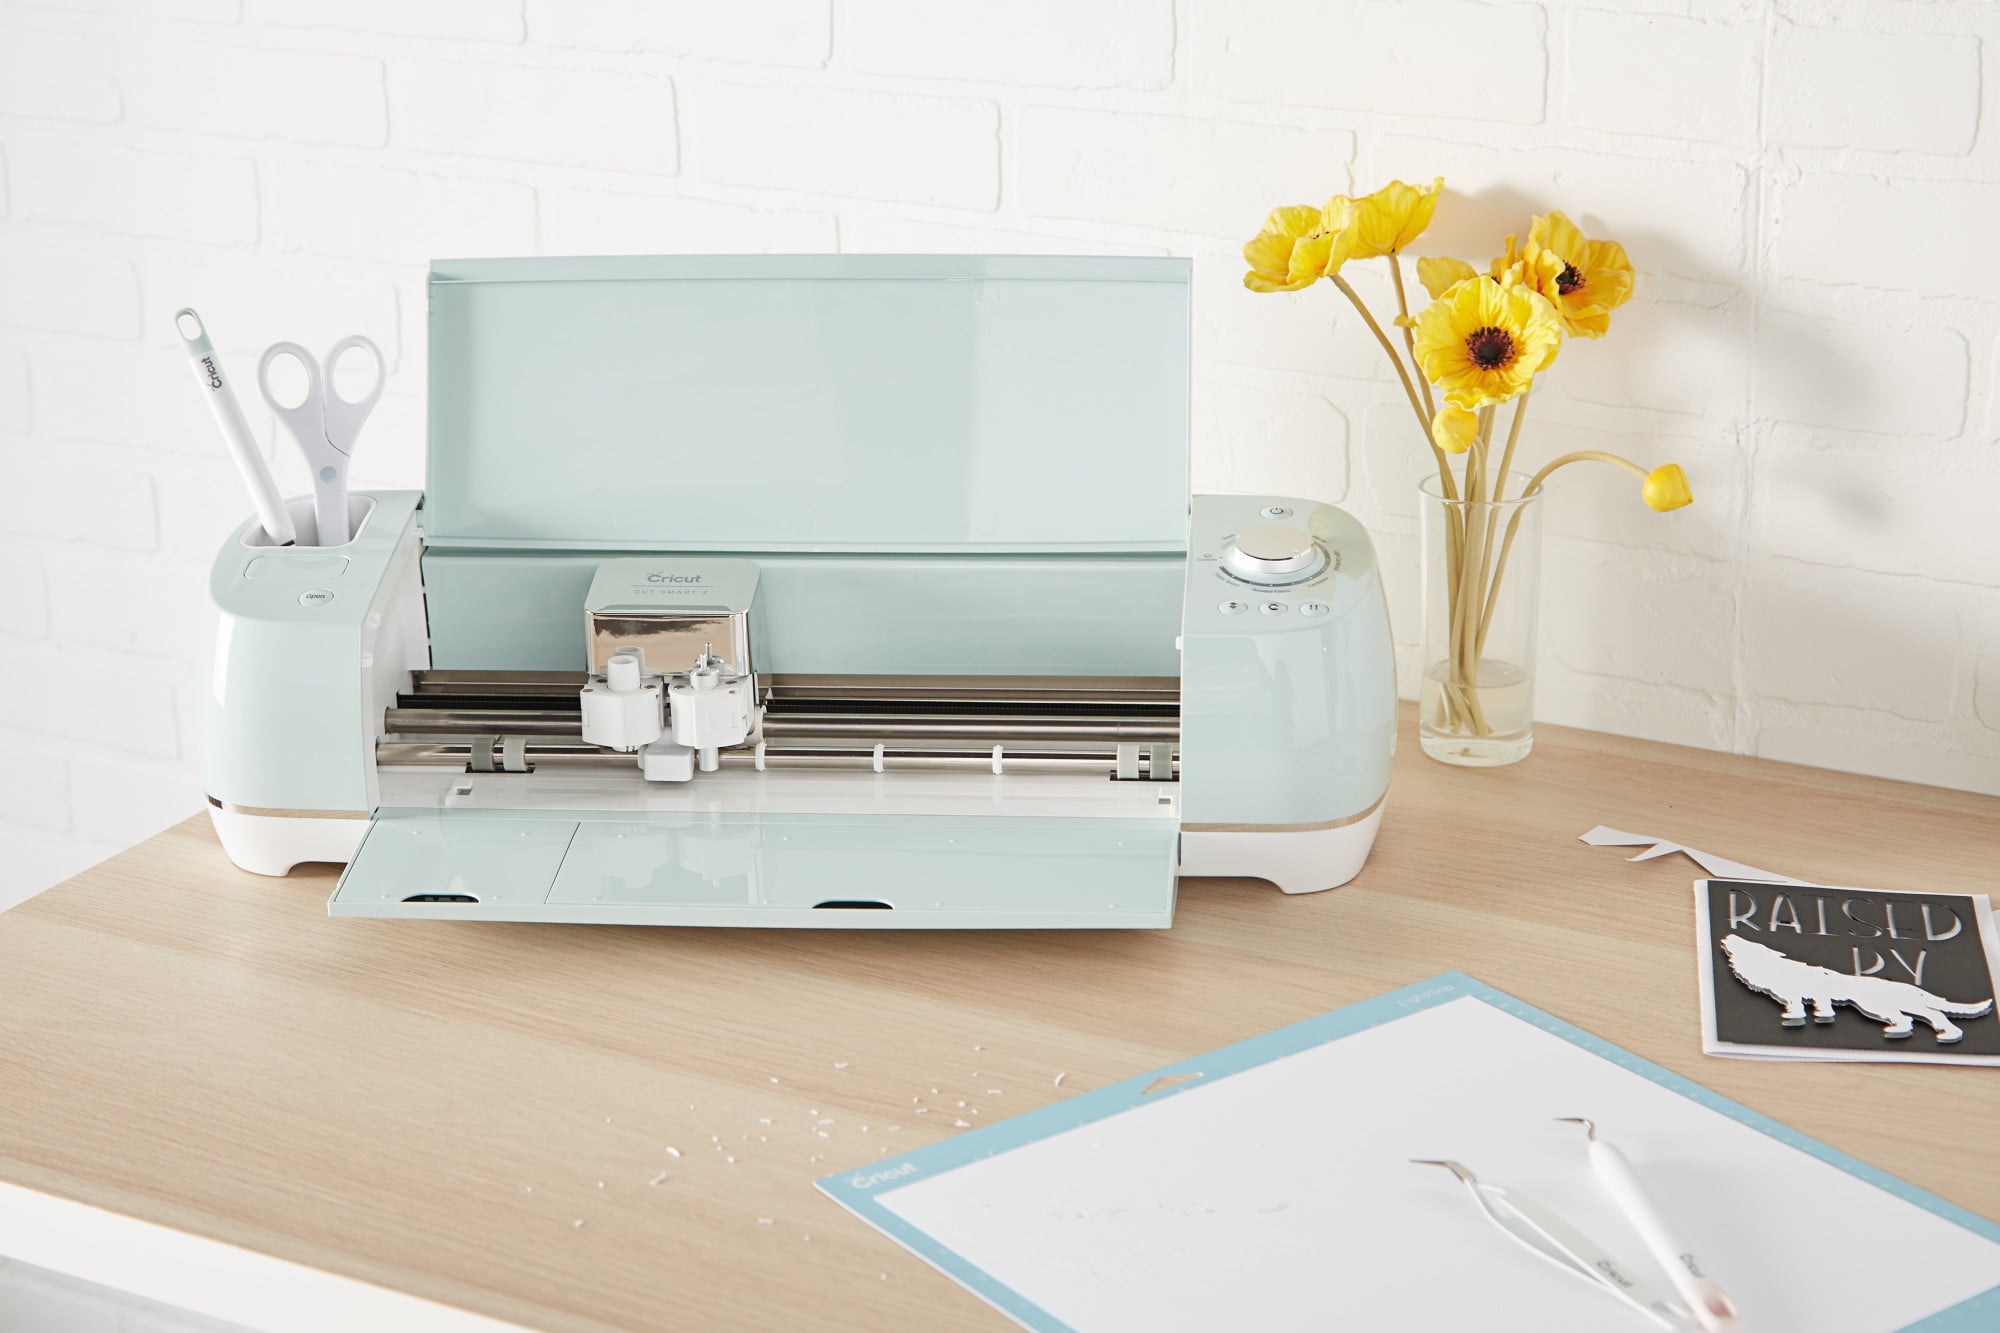 Cricut Explore Air 2 - A DIY Cutting Machine for all Crafts, Create  Customized Cards, Home Decor & More, Bluetooth Connectivity, Compatible  with iOS